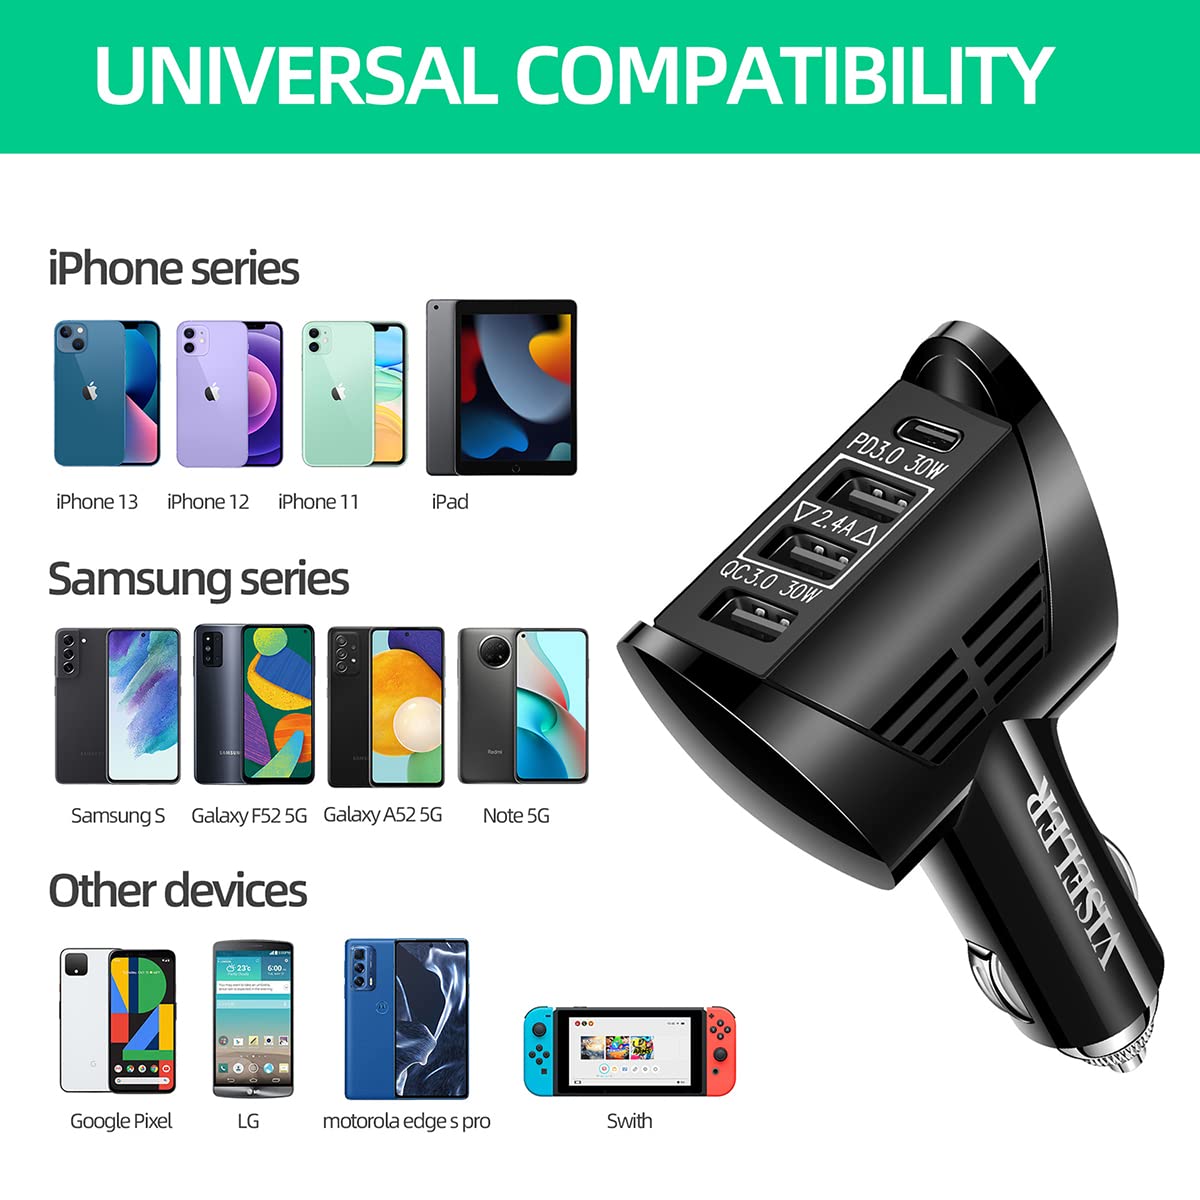 VISELER USB C Car Charger Adapter 84W 10.8A, 4 Port Fast Car Charger, PD3.0 QC3.0 Car Phone Charger Fast Charging Compatible with iPhone 13 12 11 Pro Max, Samsung Galaxy S21 20/Note 20, Pixel, LG.